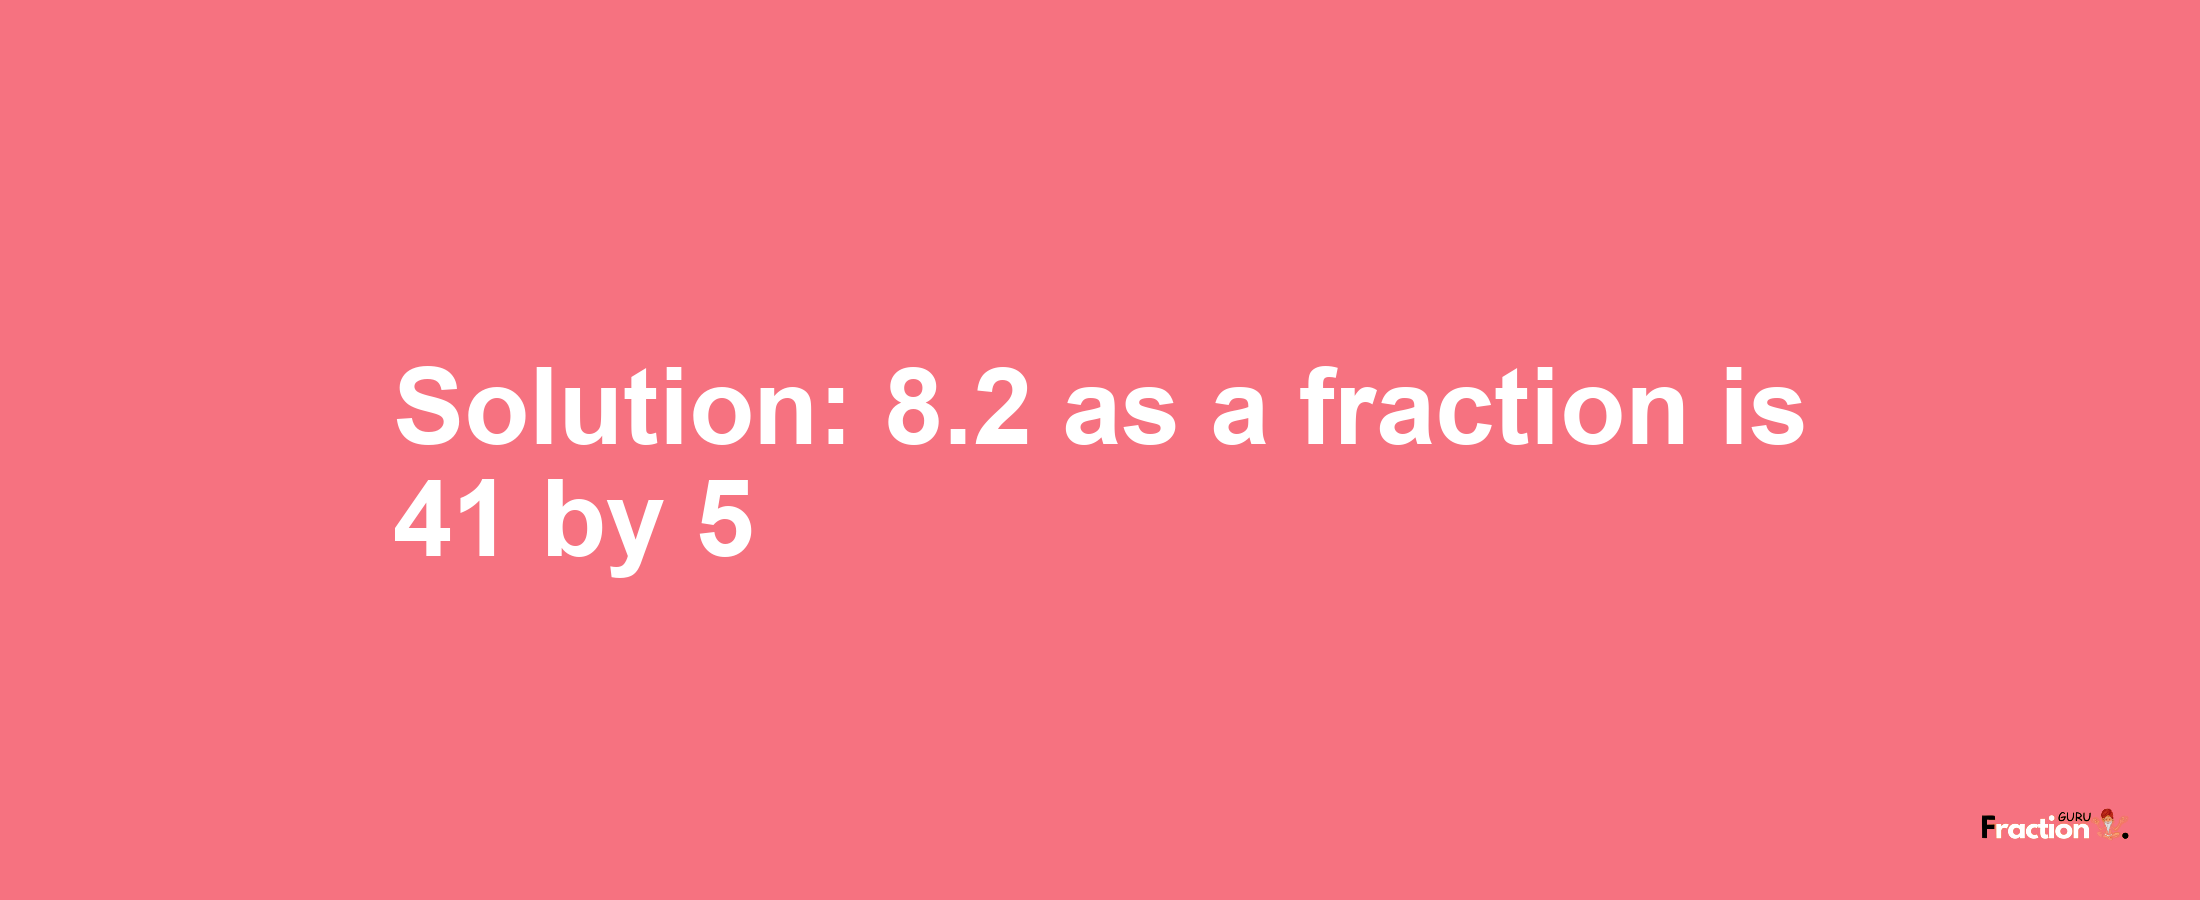 Solution:8.2 as a fraction is 41/5